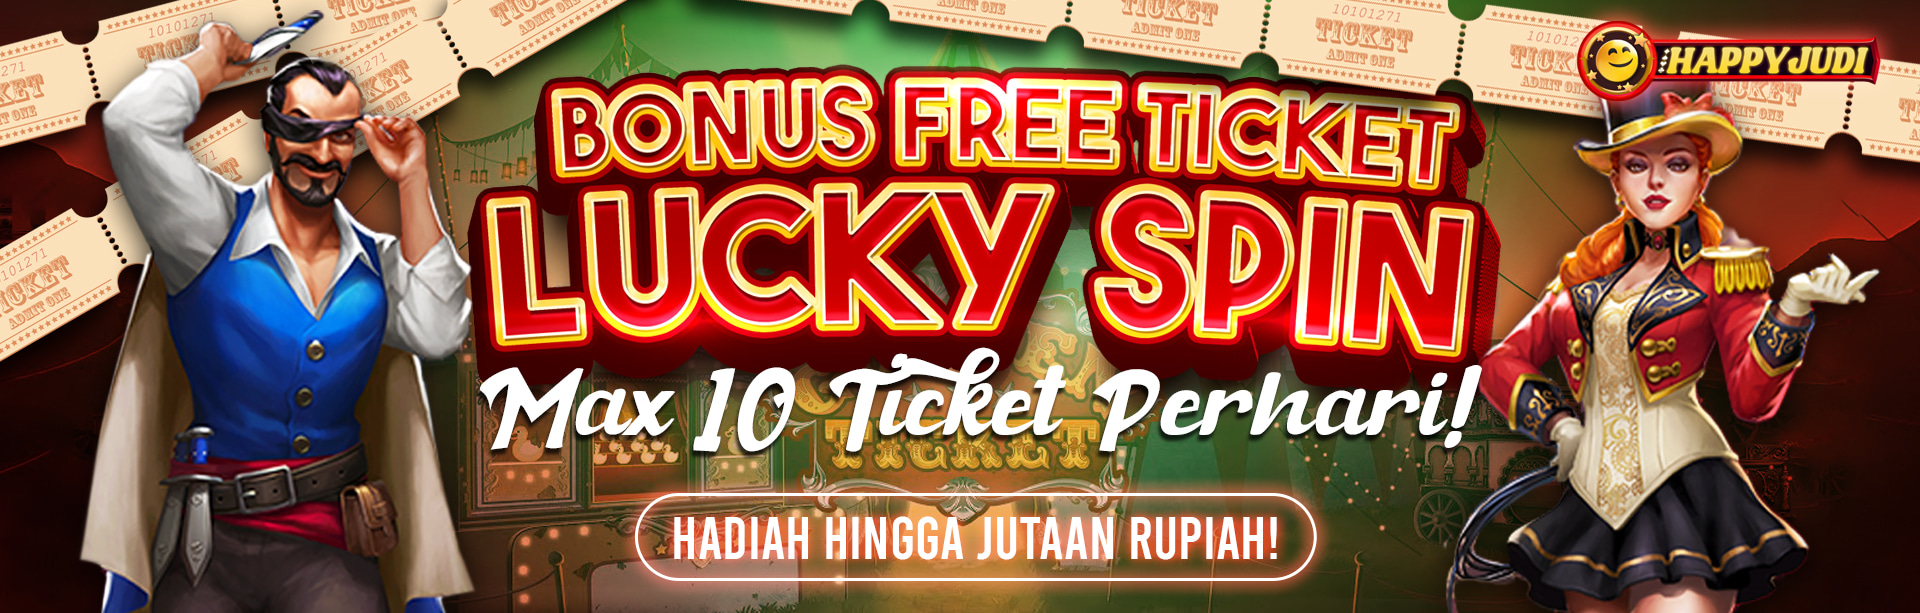 HAPPYJUDI FREE LUCKY SPIN TICKET RE-DEPO MEMBER